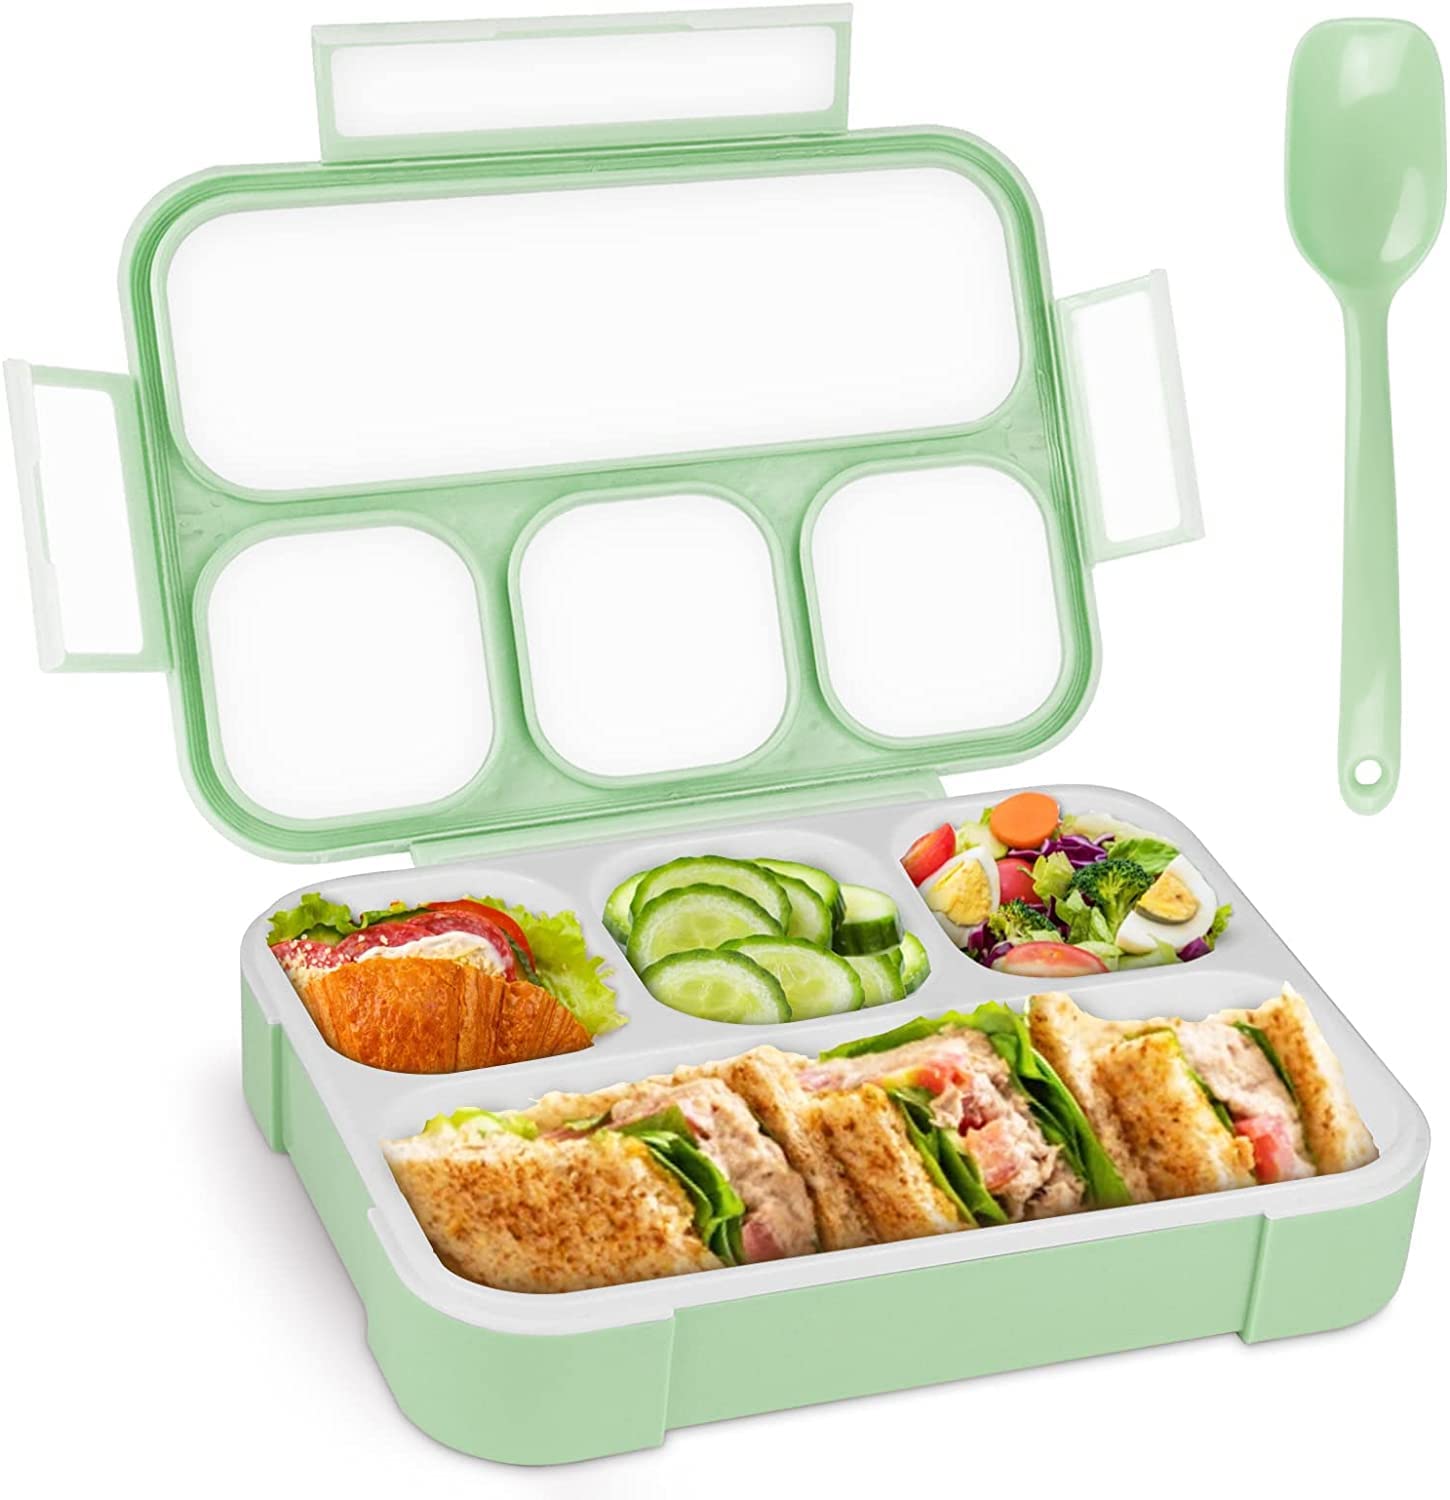 Xelvix Lunch Boxes For Adults - Tiffin Box Lunch Box For Kids Childrens With Fork - Durable Perfect Size For On-The-Go Meal, Bpa-Free And Food-Safe Materials (Green, Stainless Steel), 1100 Milliliter